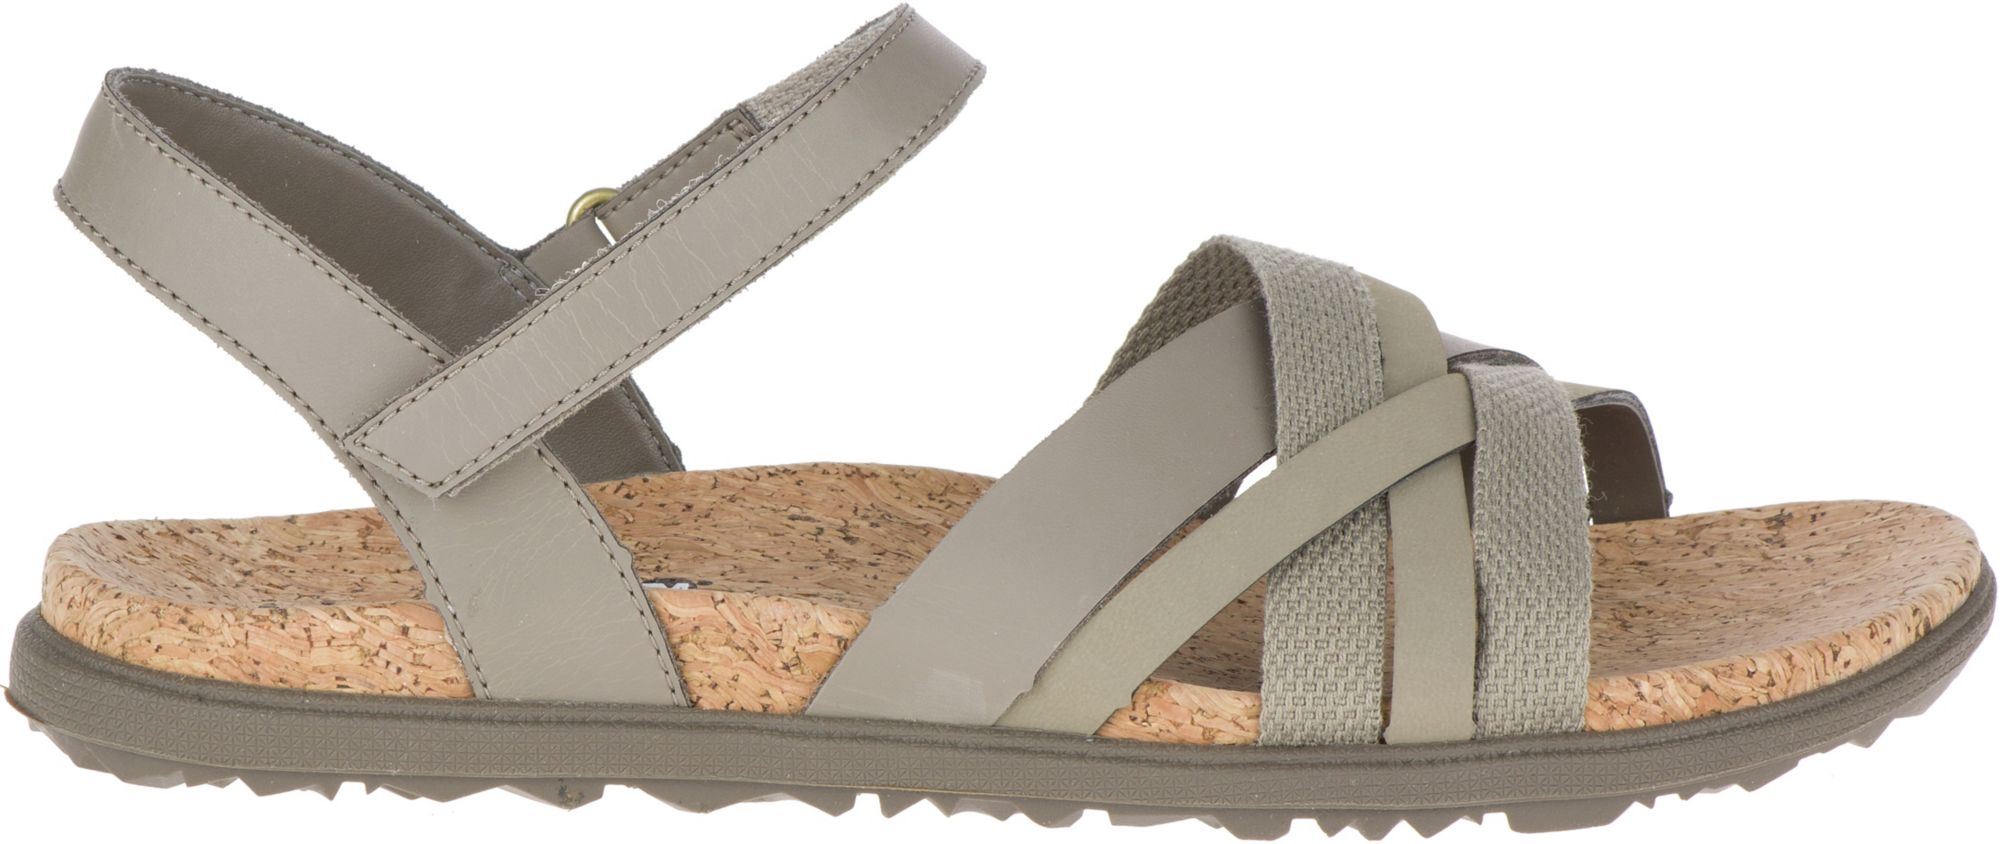 womens sandals with backstrap